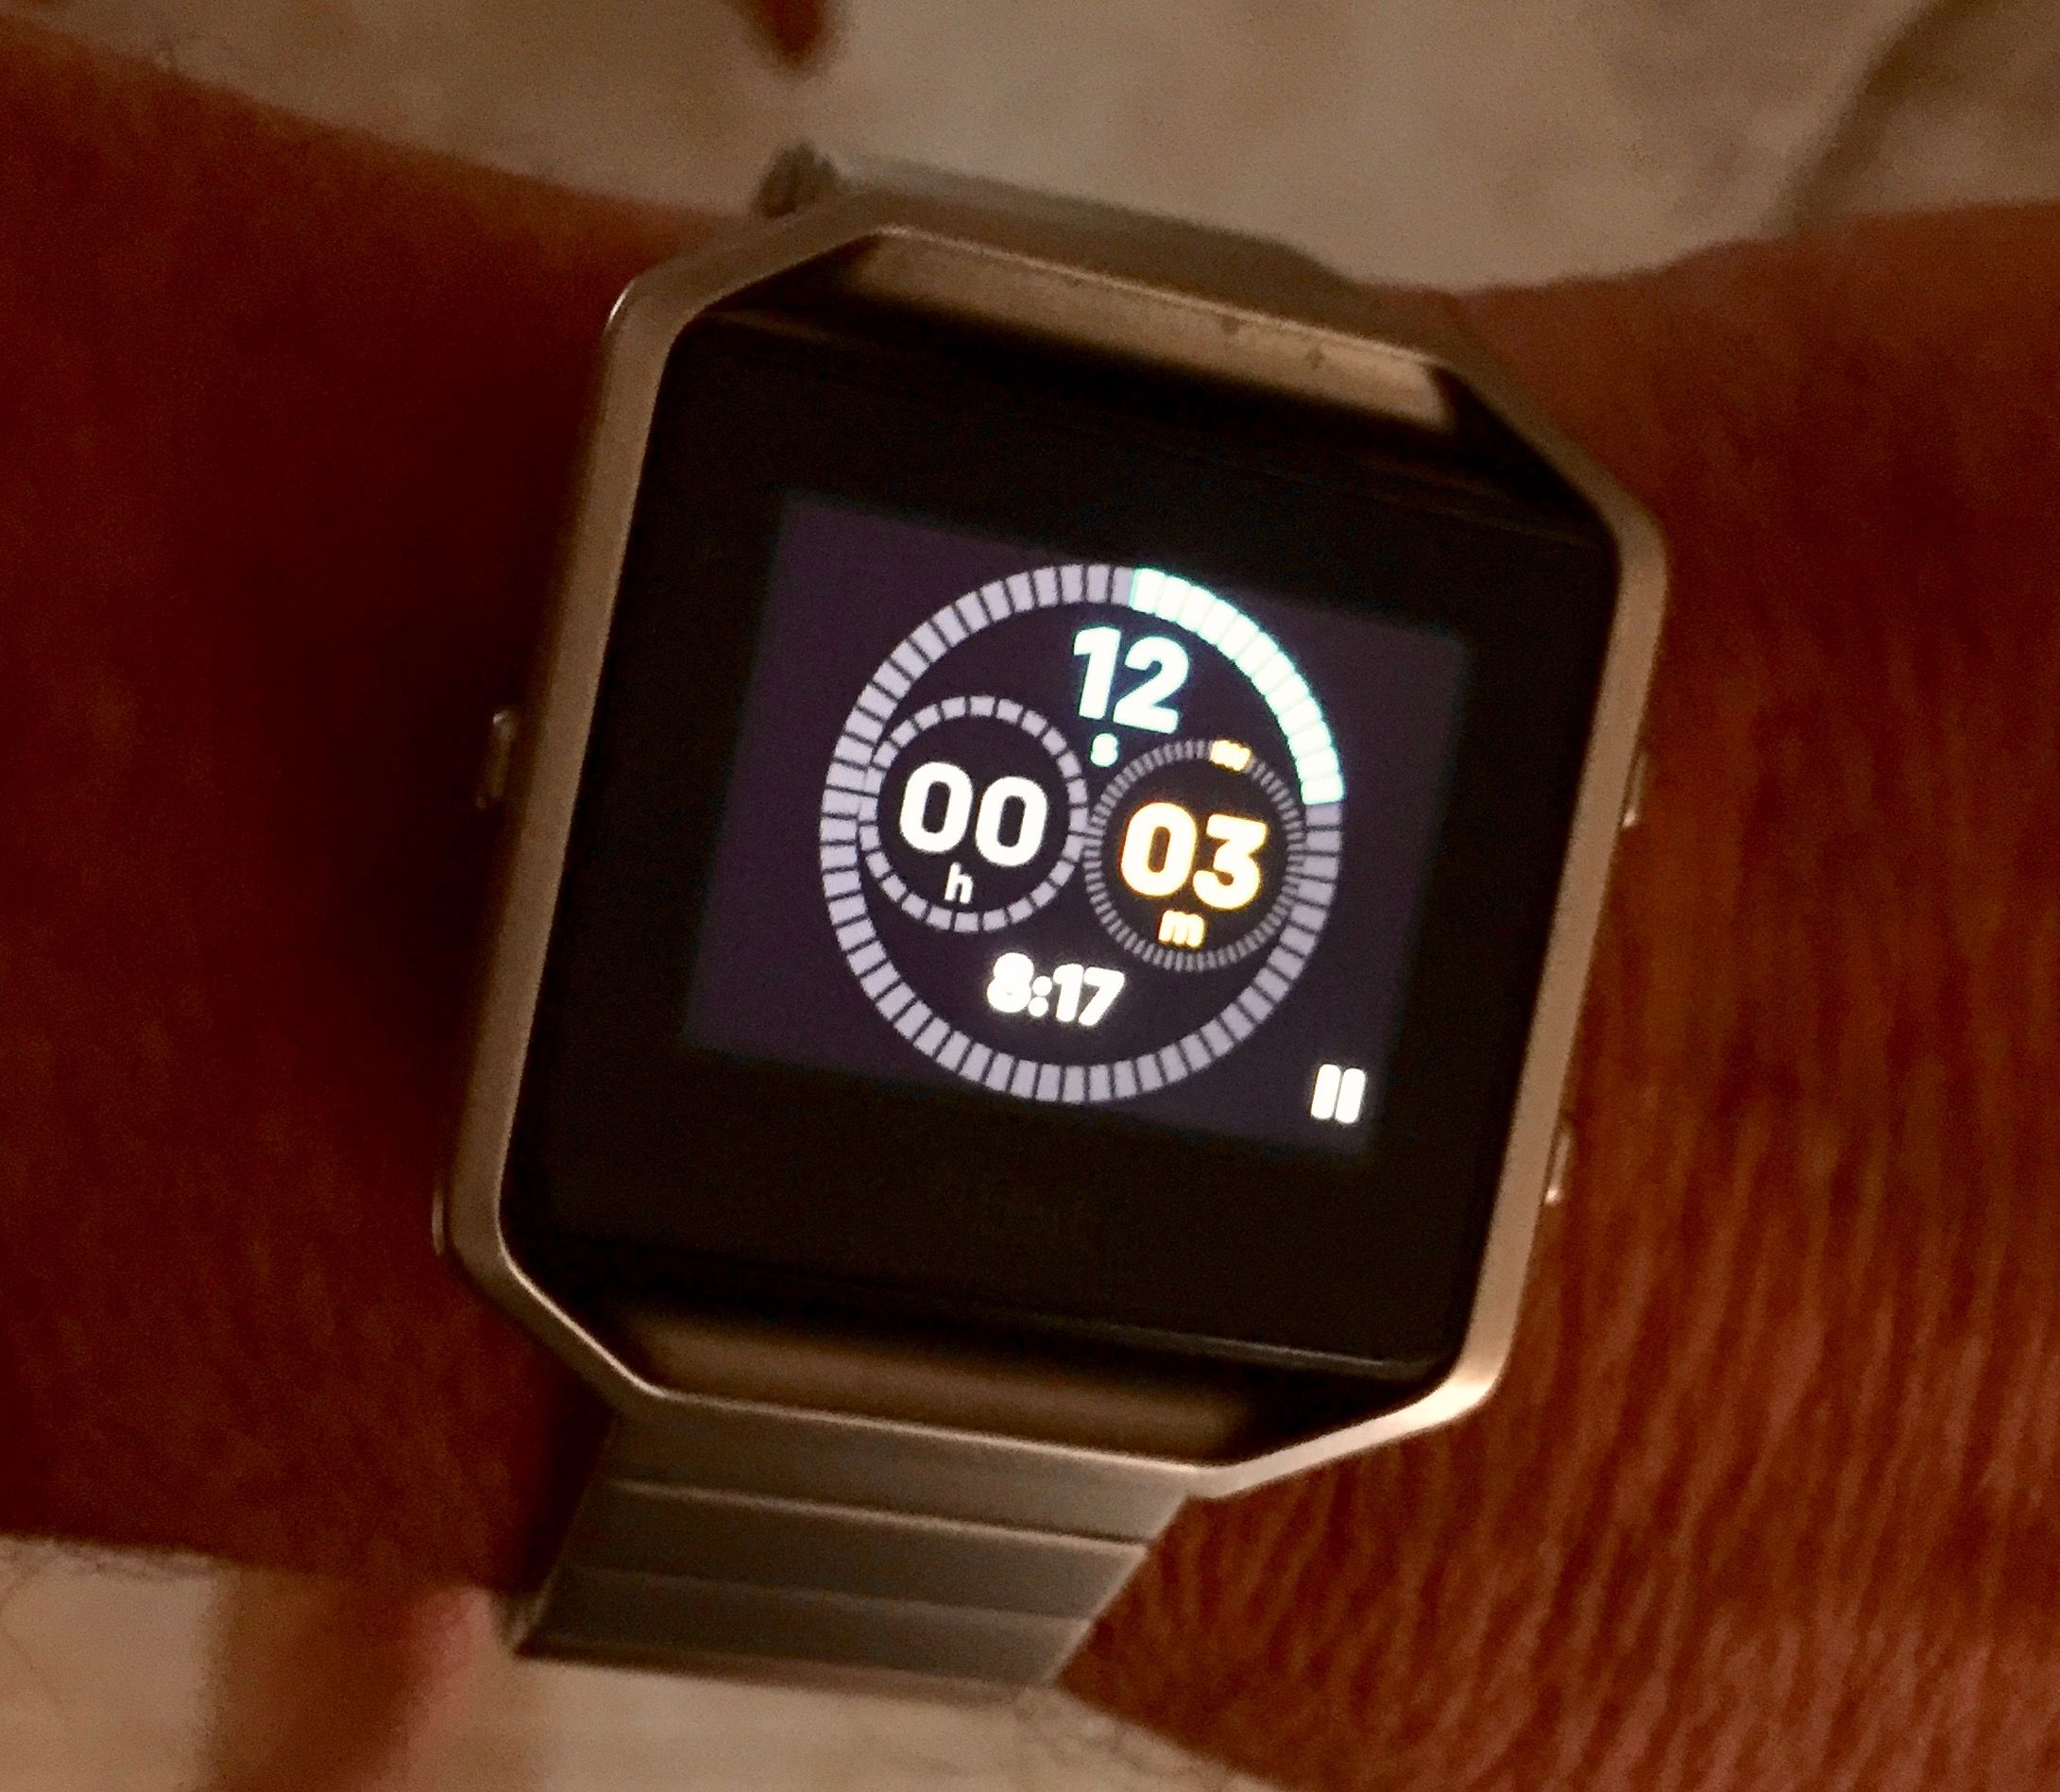 fitbit versa clock faces with seconds